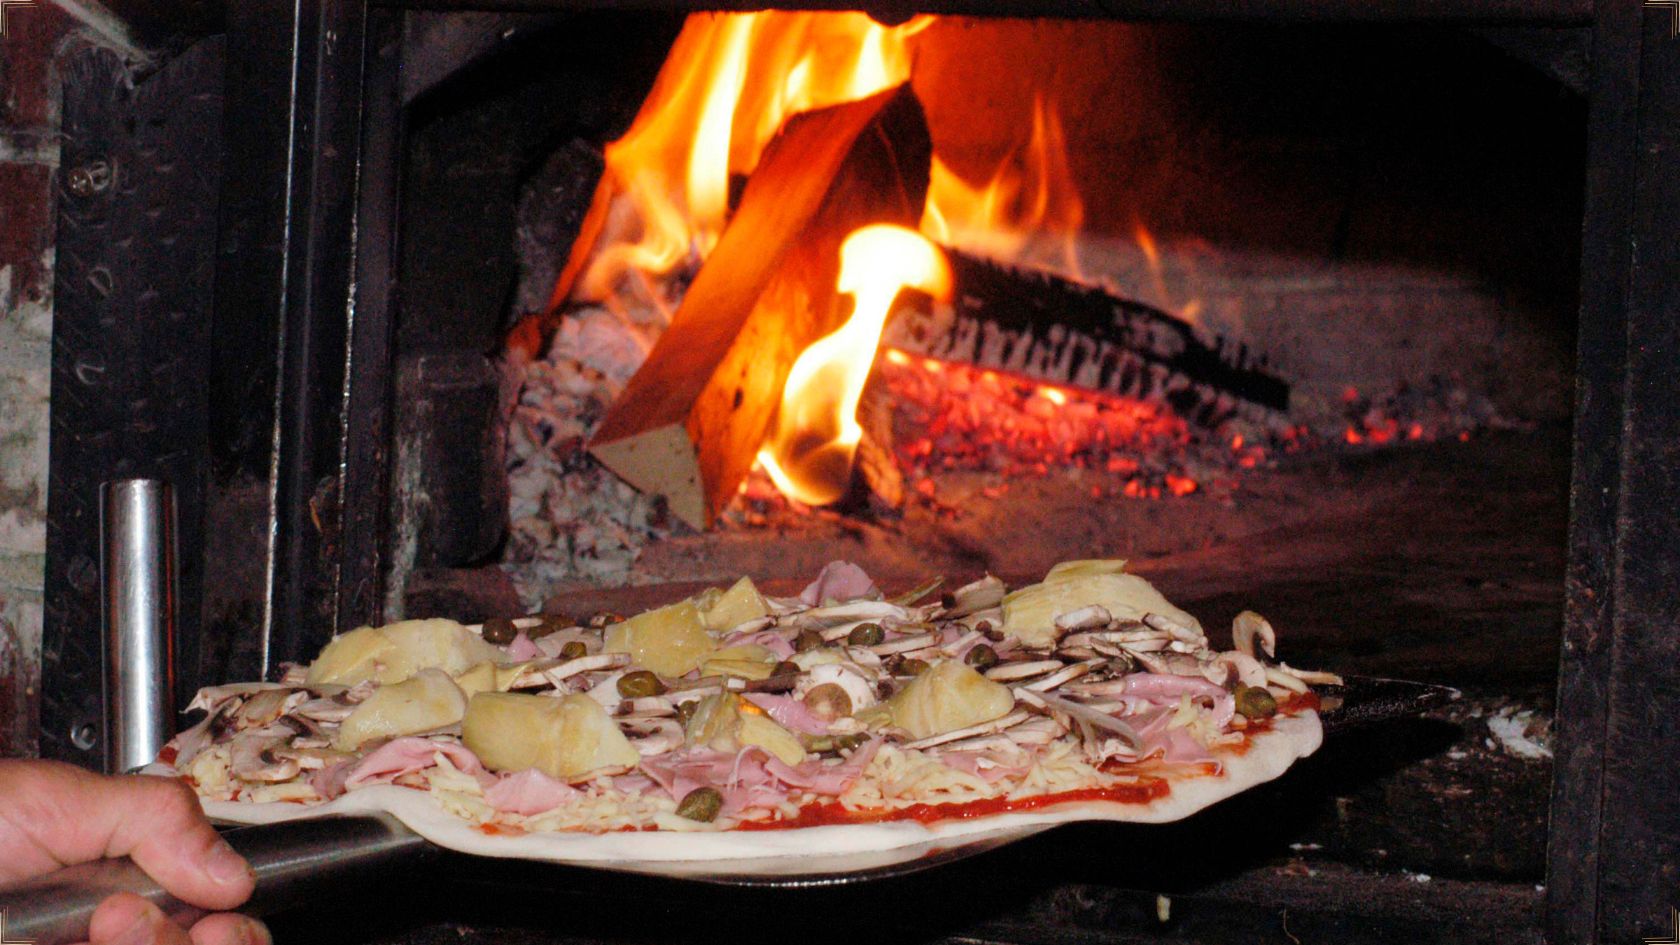 Best Wood For Pizza Oven